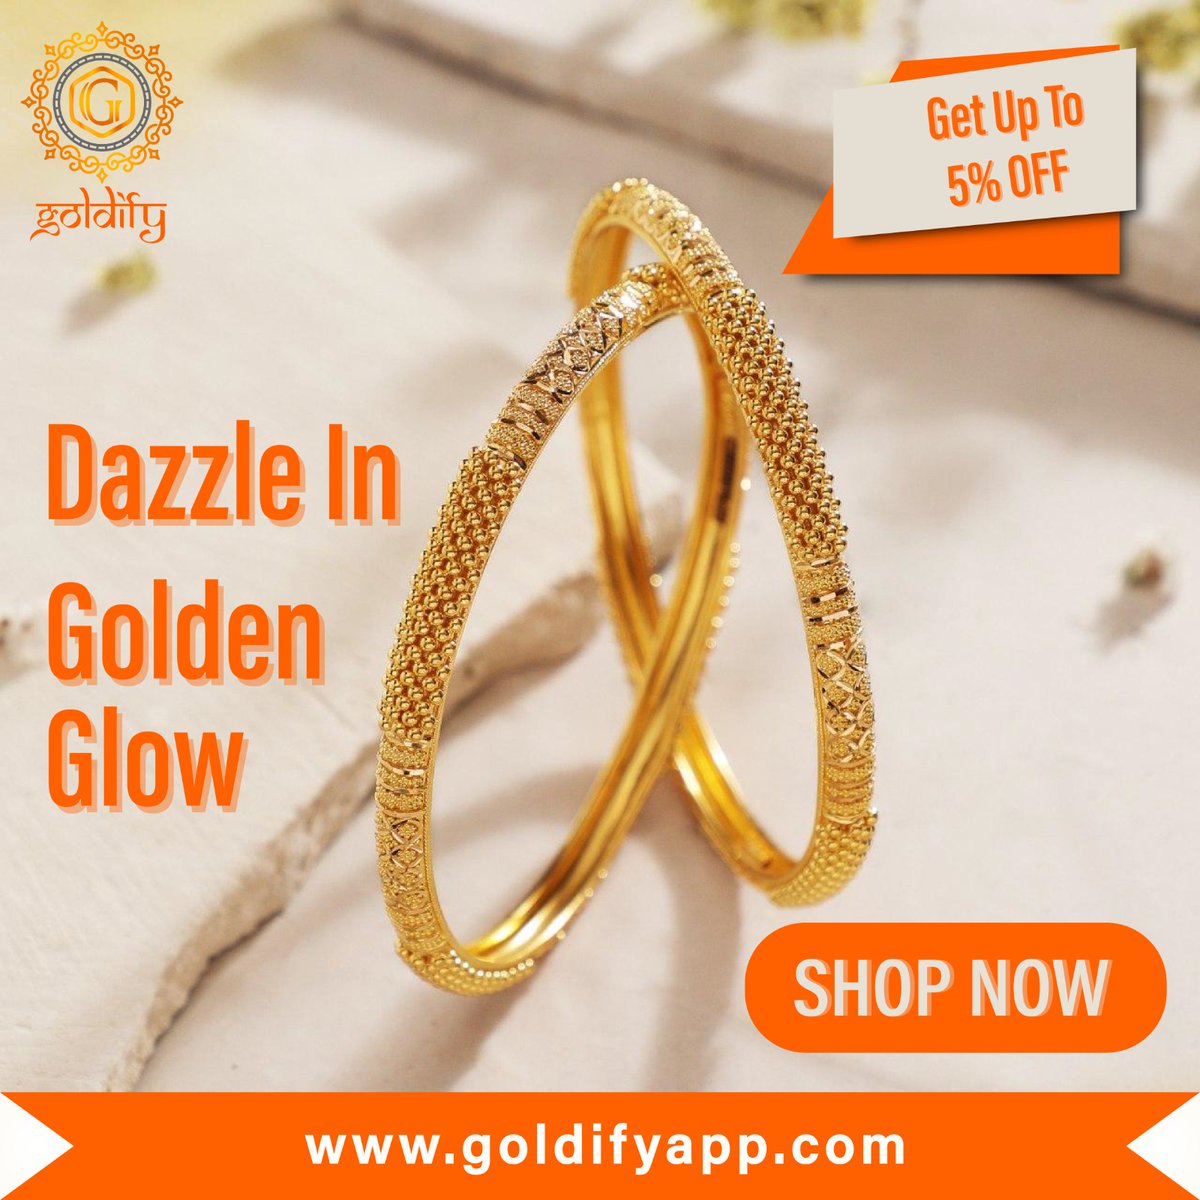 Get beautifully crafted gold jewellery from Goldify. A Trusted platform for you and your loved ones.

#goldify #goldjewellery #jewellerycollections #goldtrends #gold